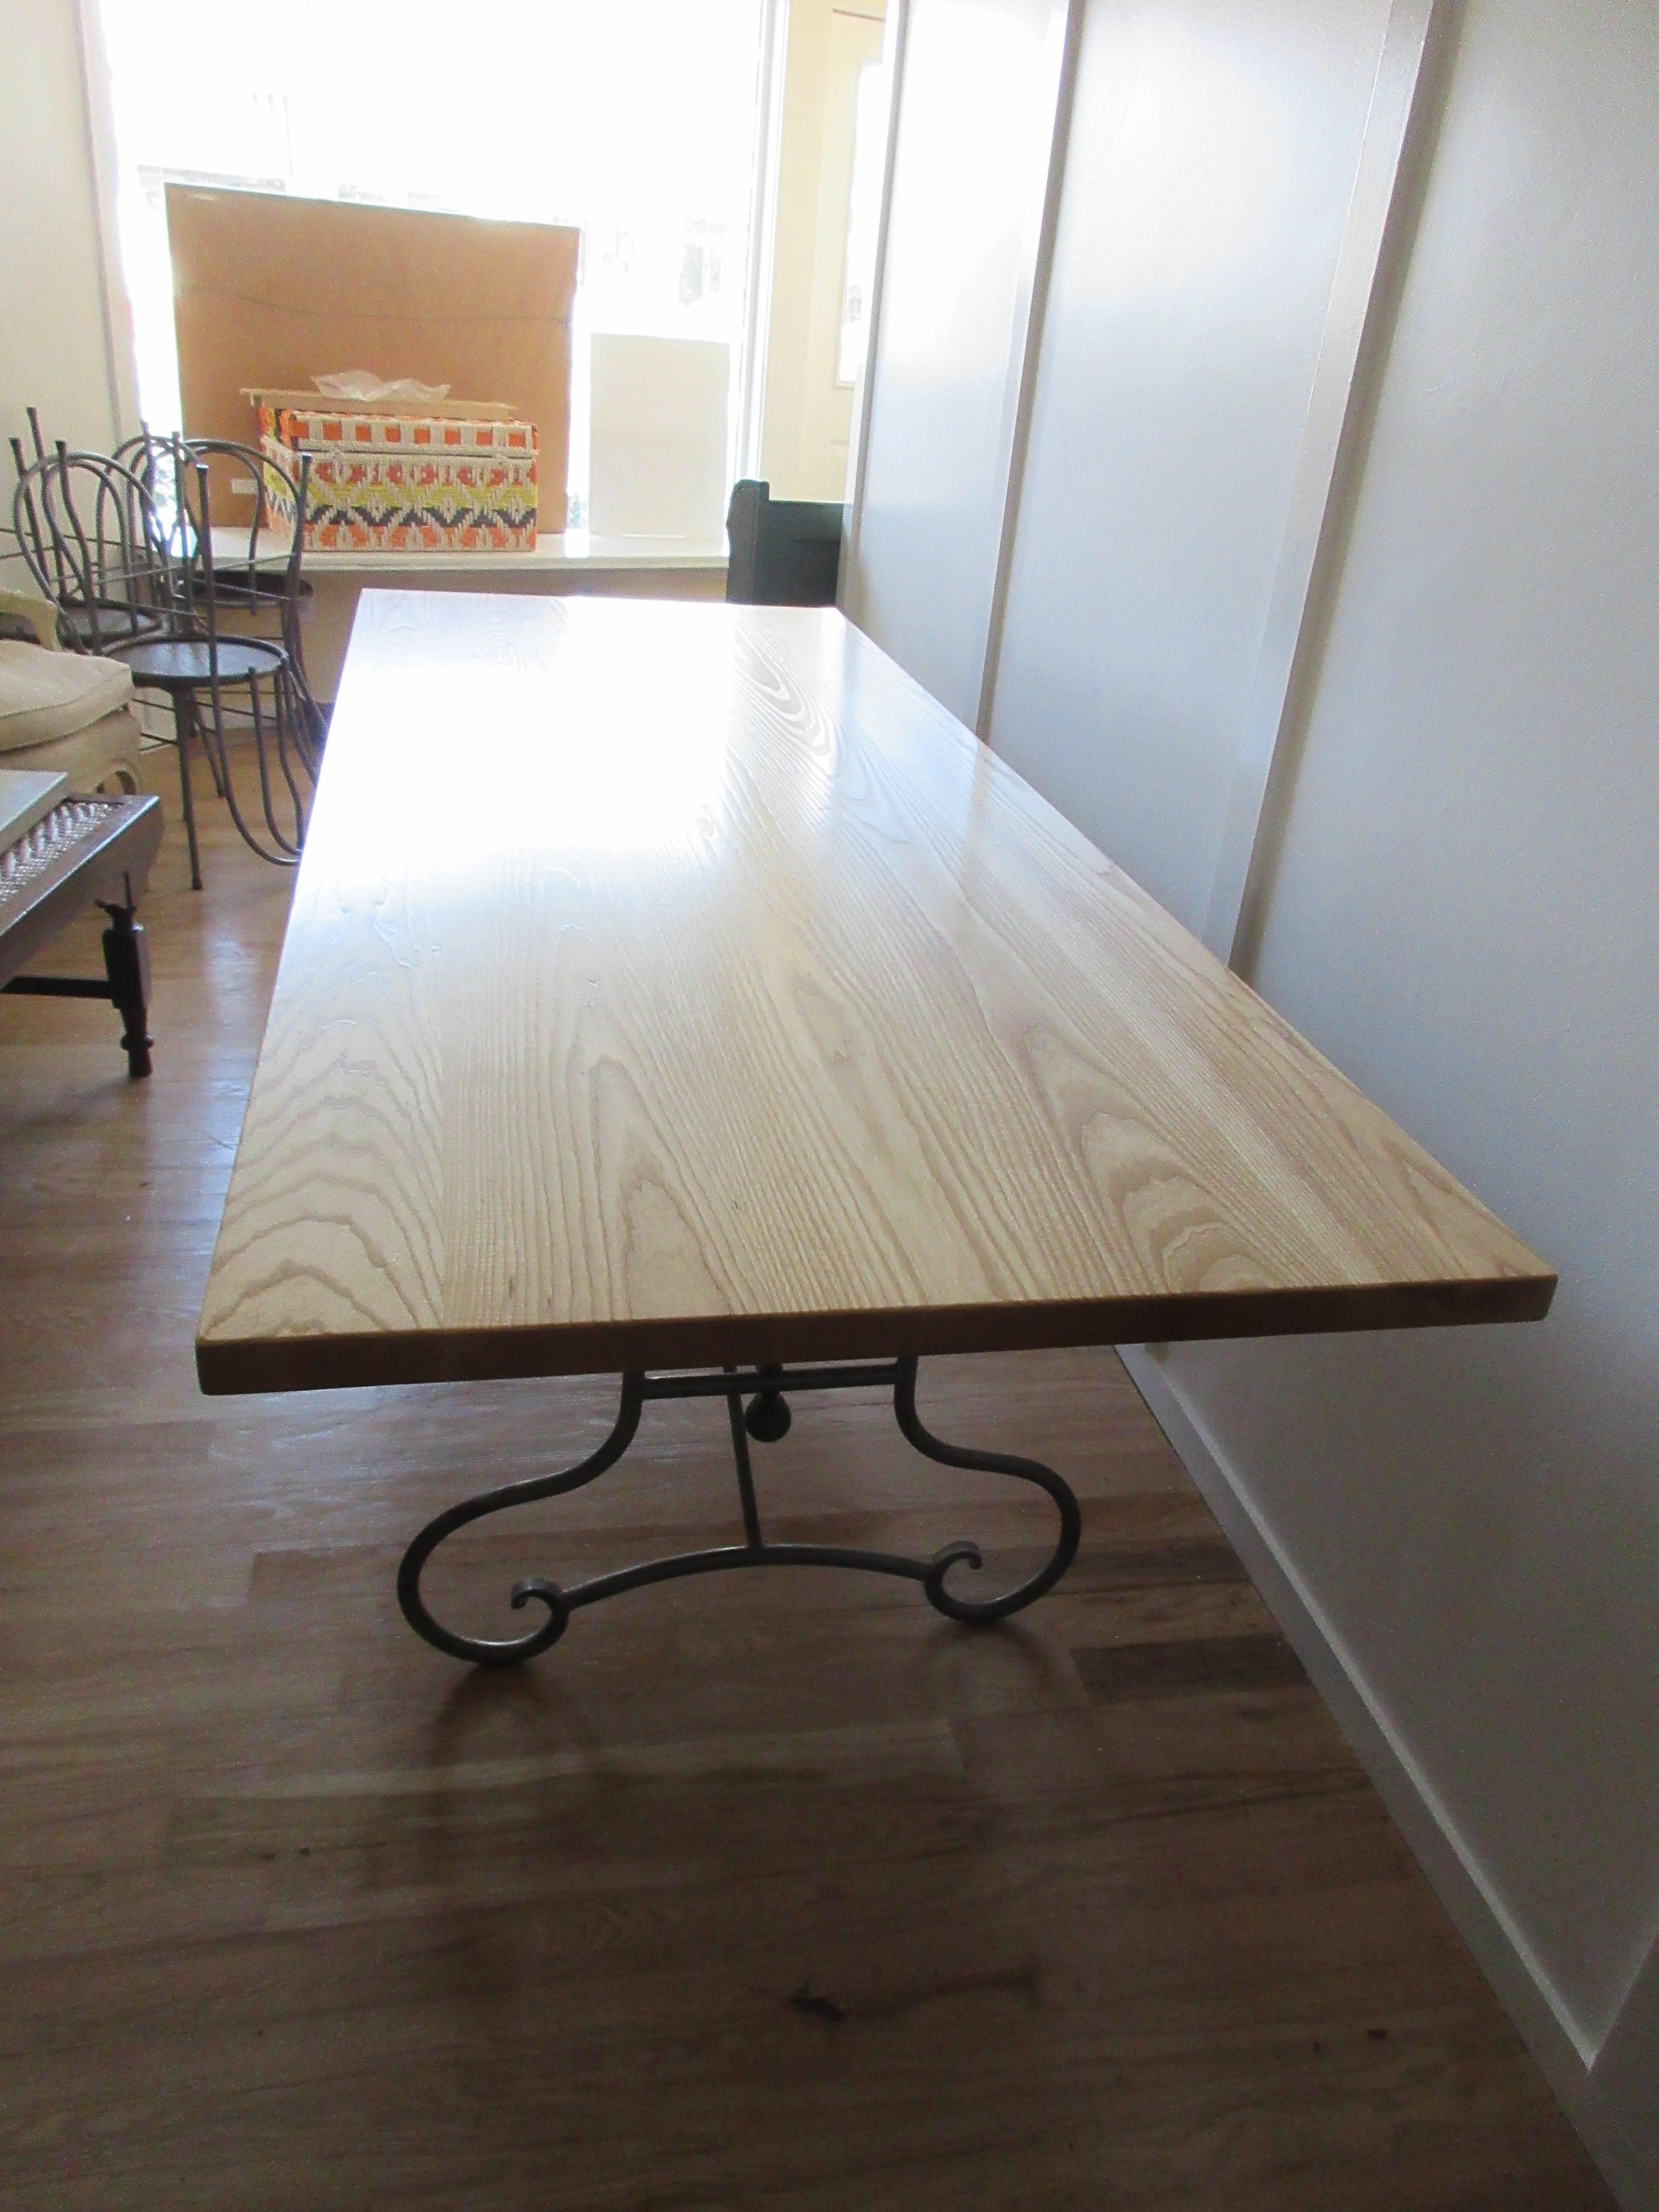 French dinning room table with an Art Nouveau scrolled iron base, paired with a modern new ash wood top, a great look. Seats 10 easily and 12 if needed.
Measuring 8 feet in length.